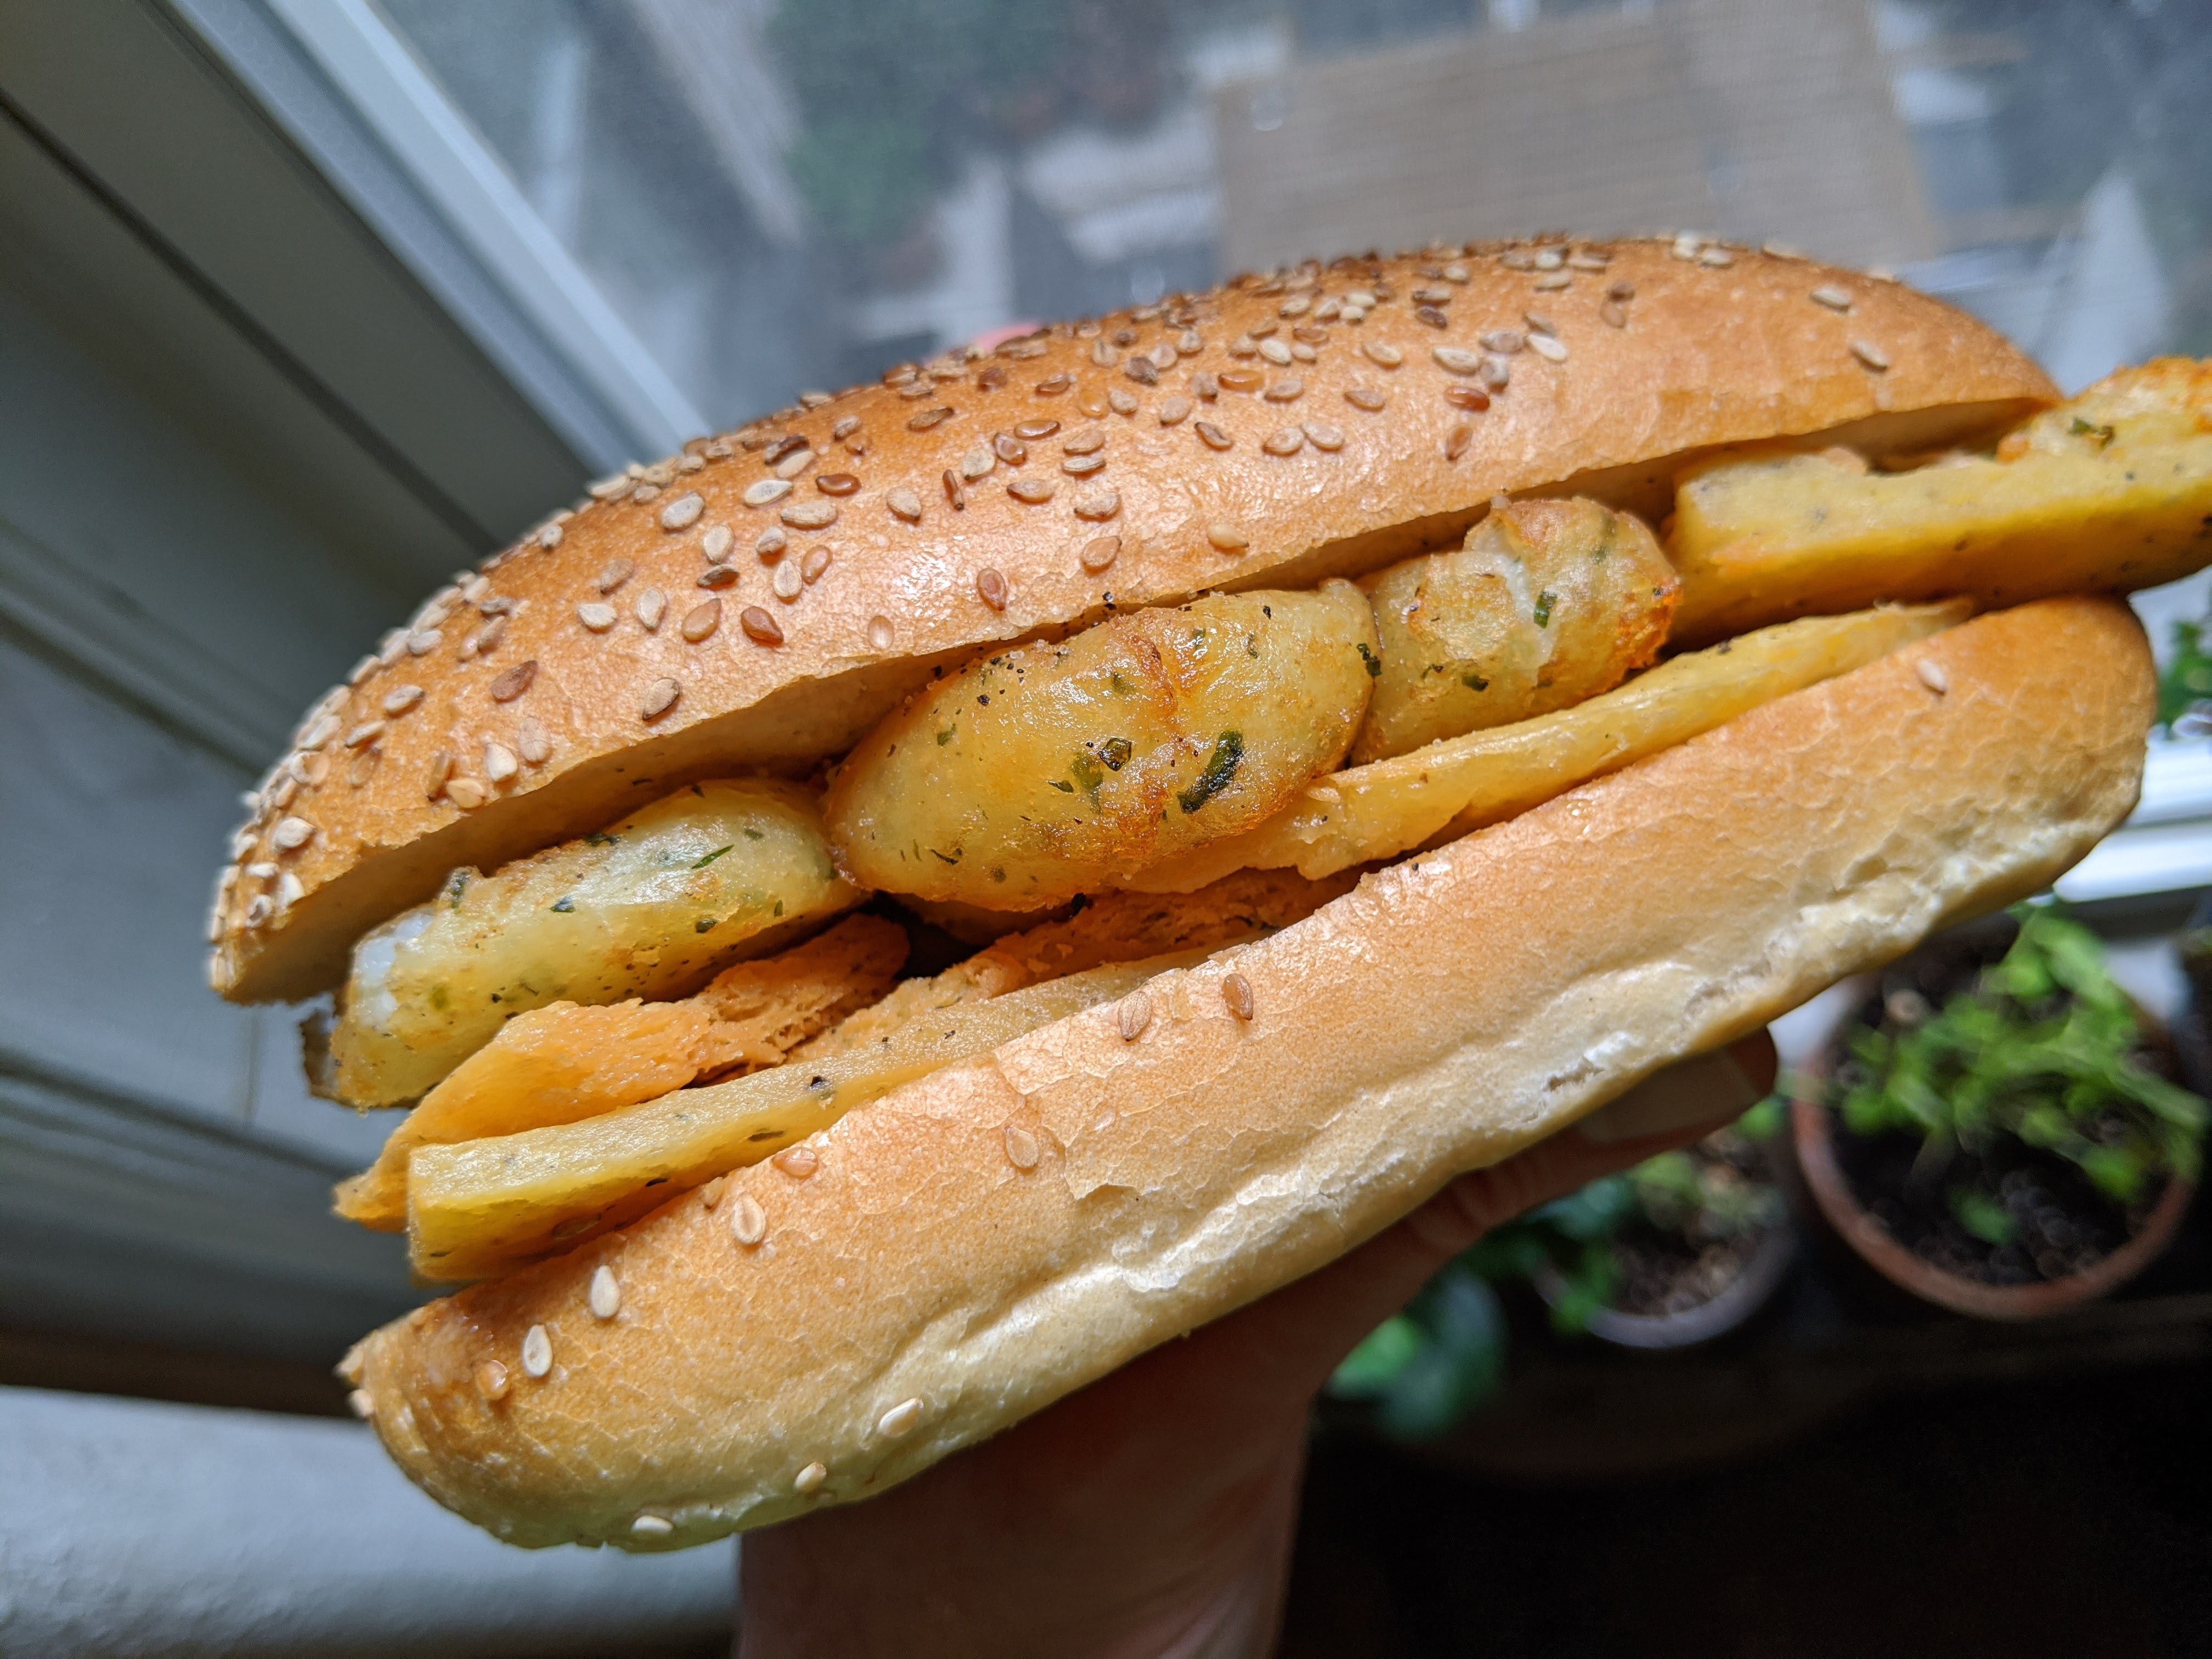 An oblong sandwich with flat browned fritters and round small potatoes.